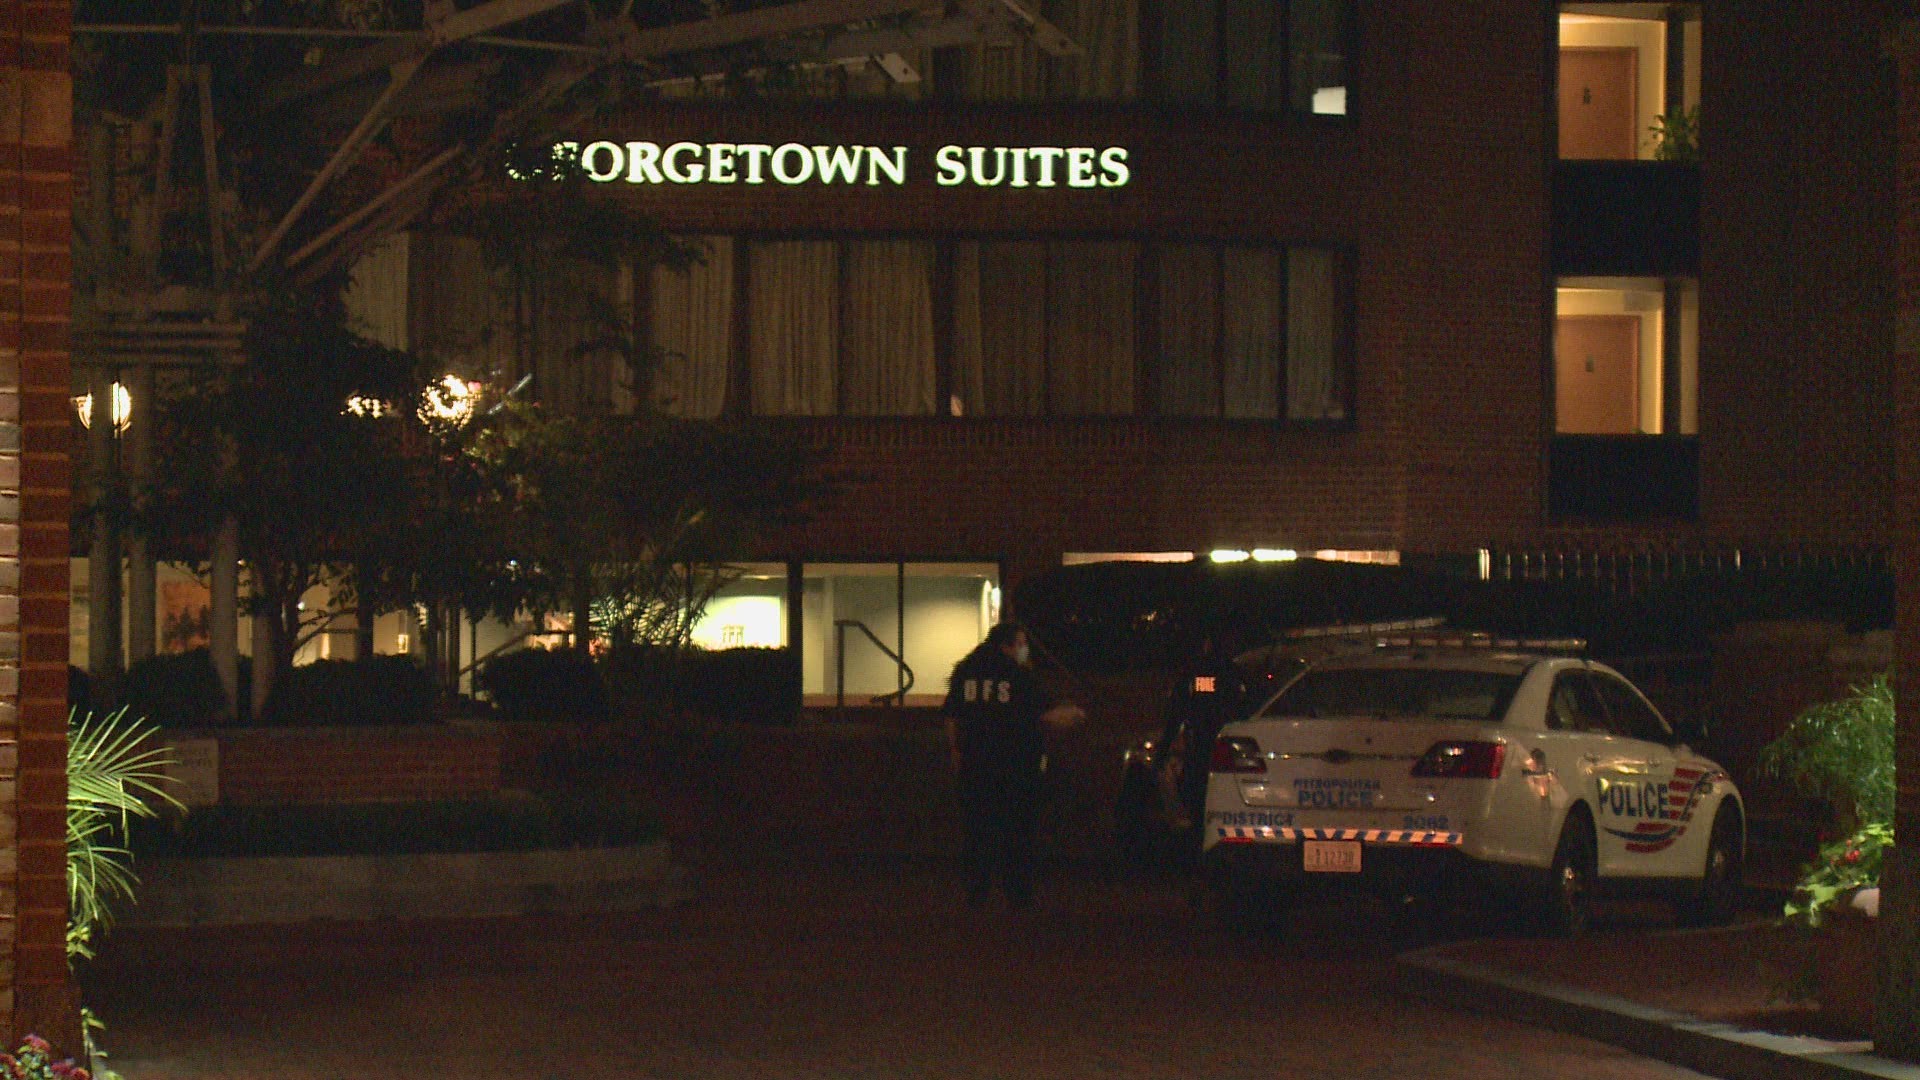 A man was found stabbed in the neck at Georgetown Suites Hotel early Wednesday morning.